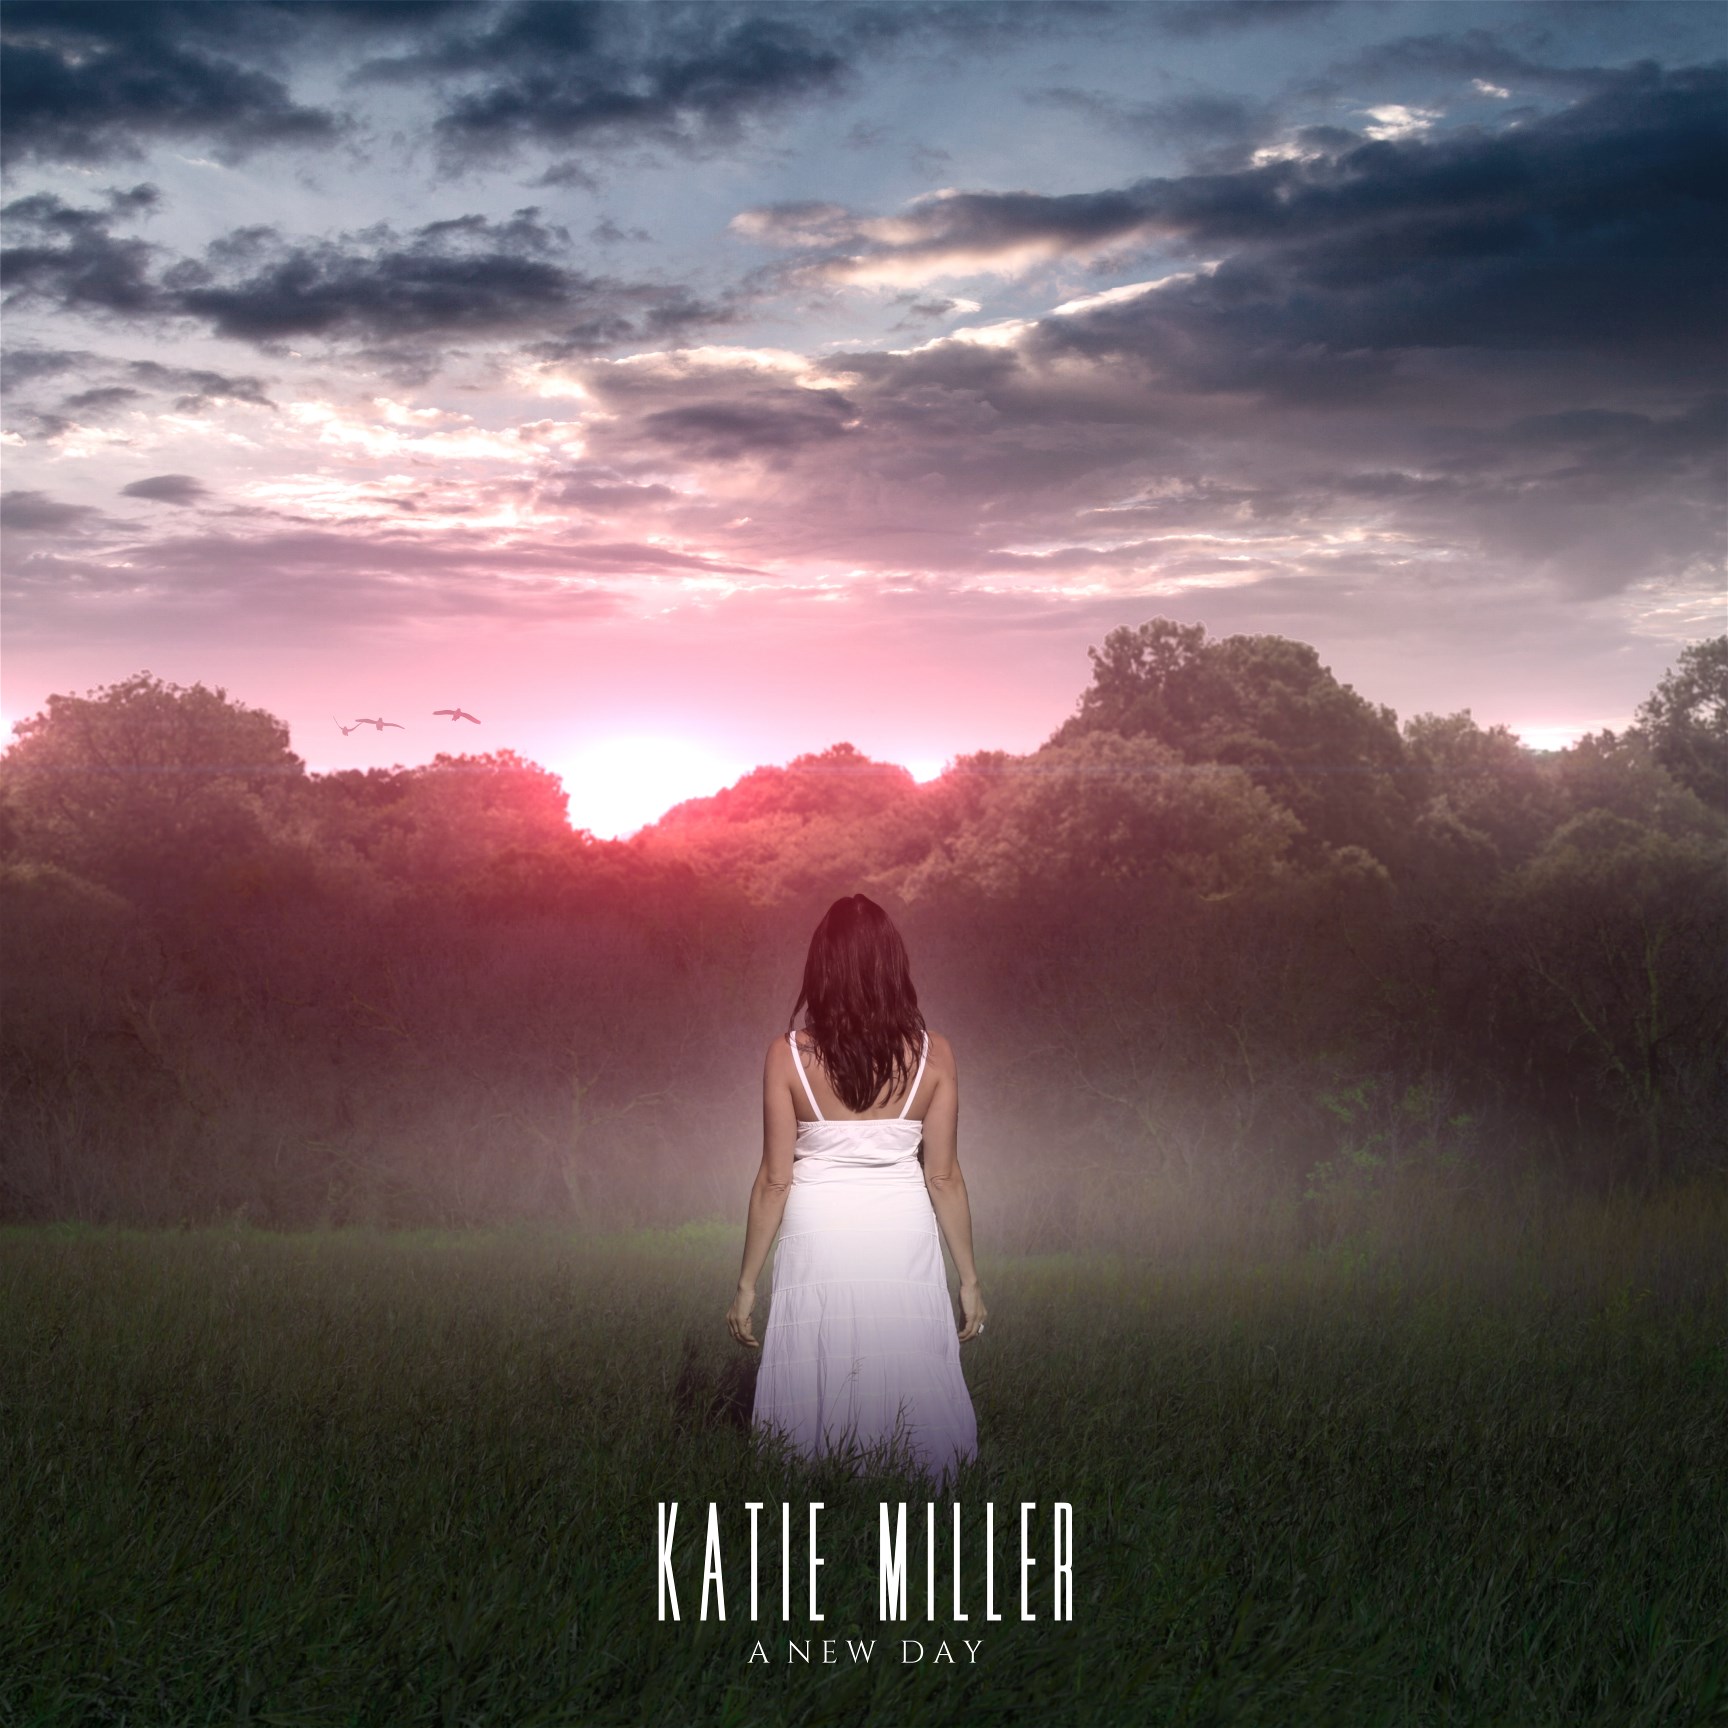 KATIE MILLER - A NEW DAY